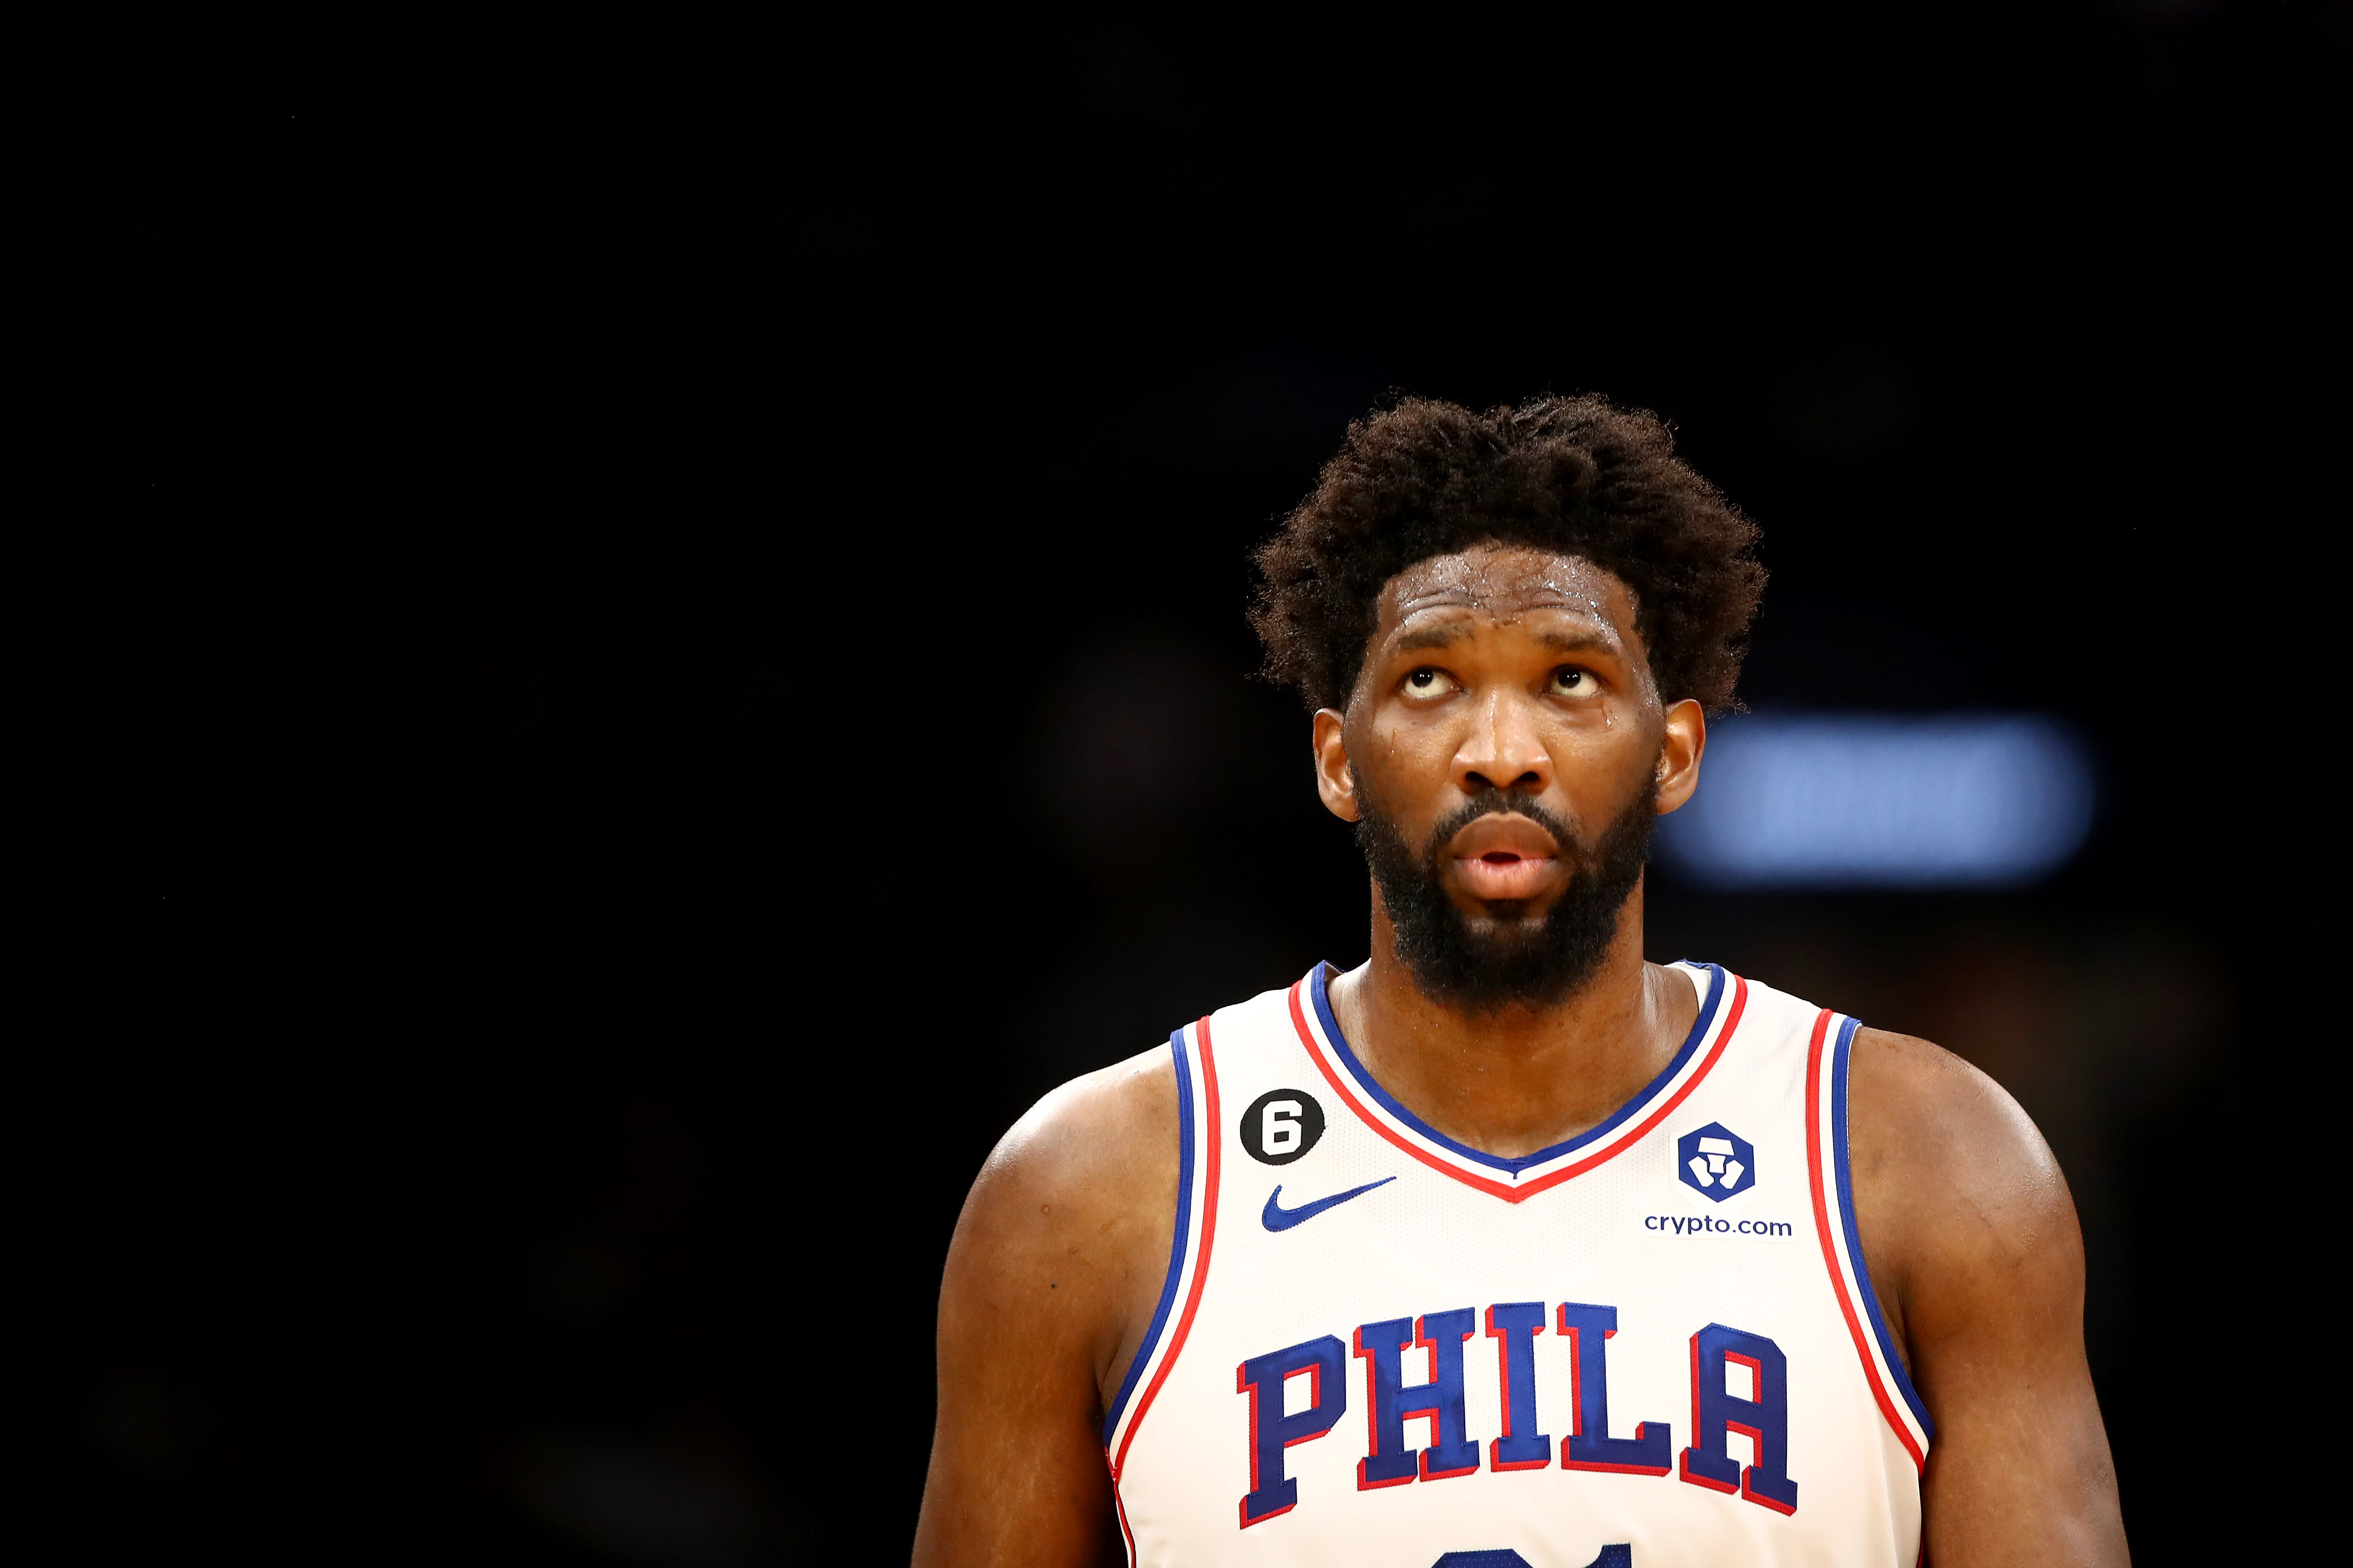 McCaffery: Ten reasons Sixers are better suited for playoffs this year